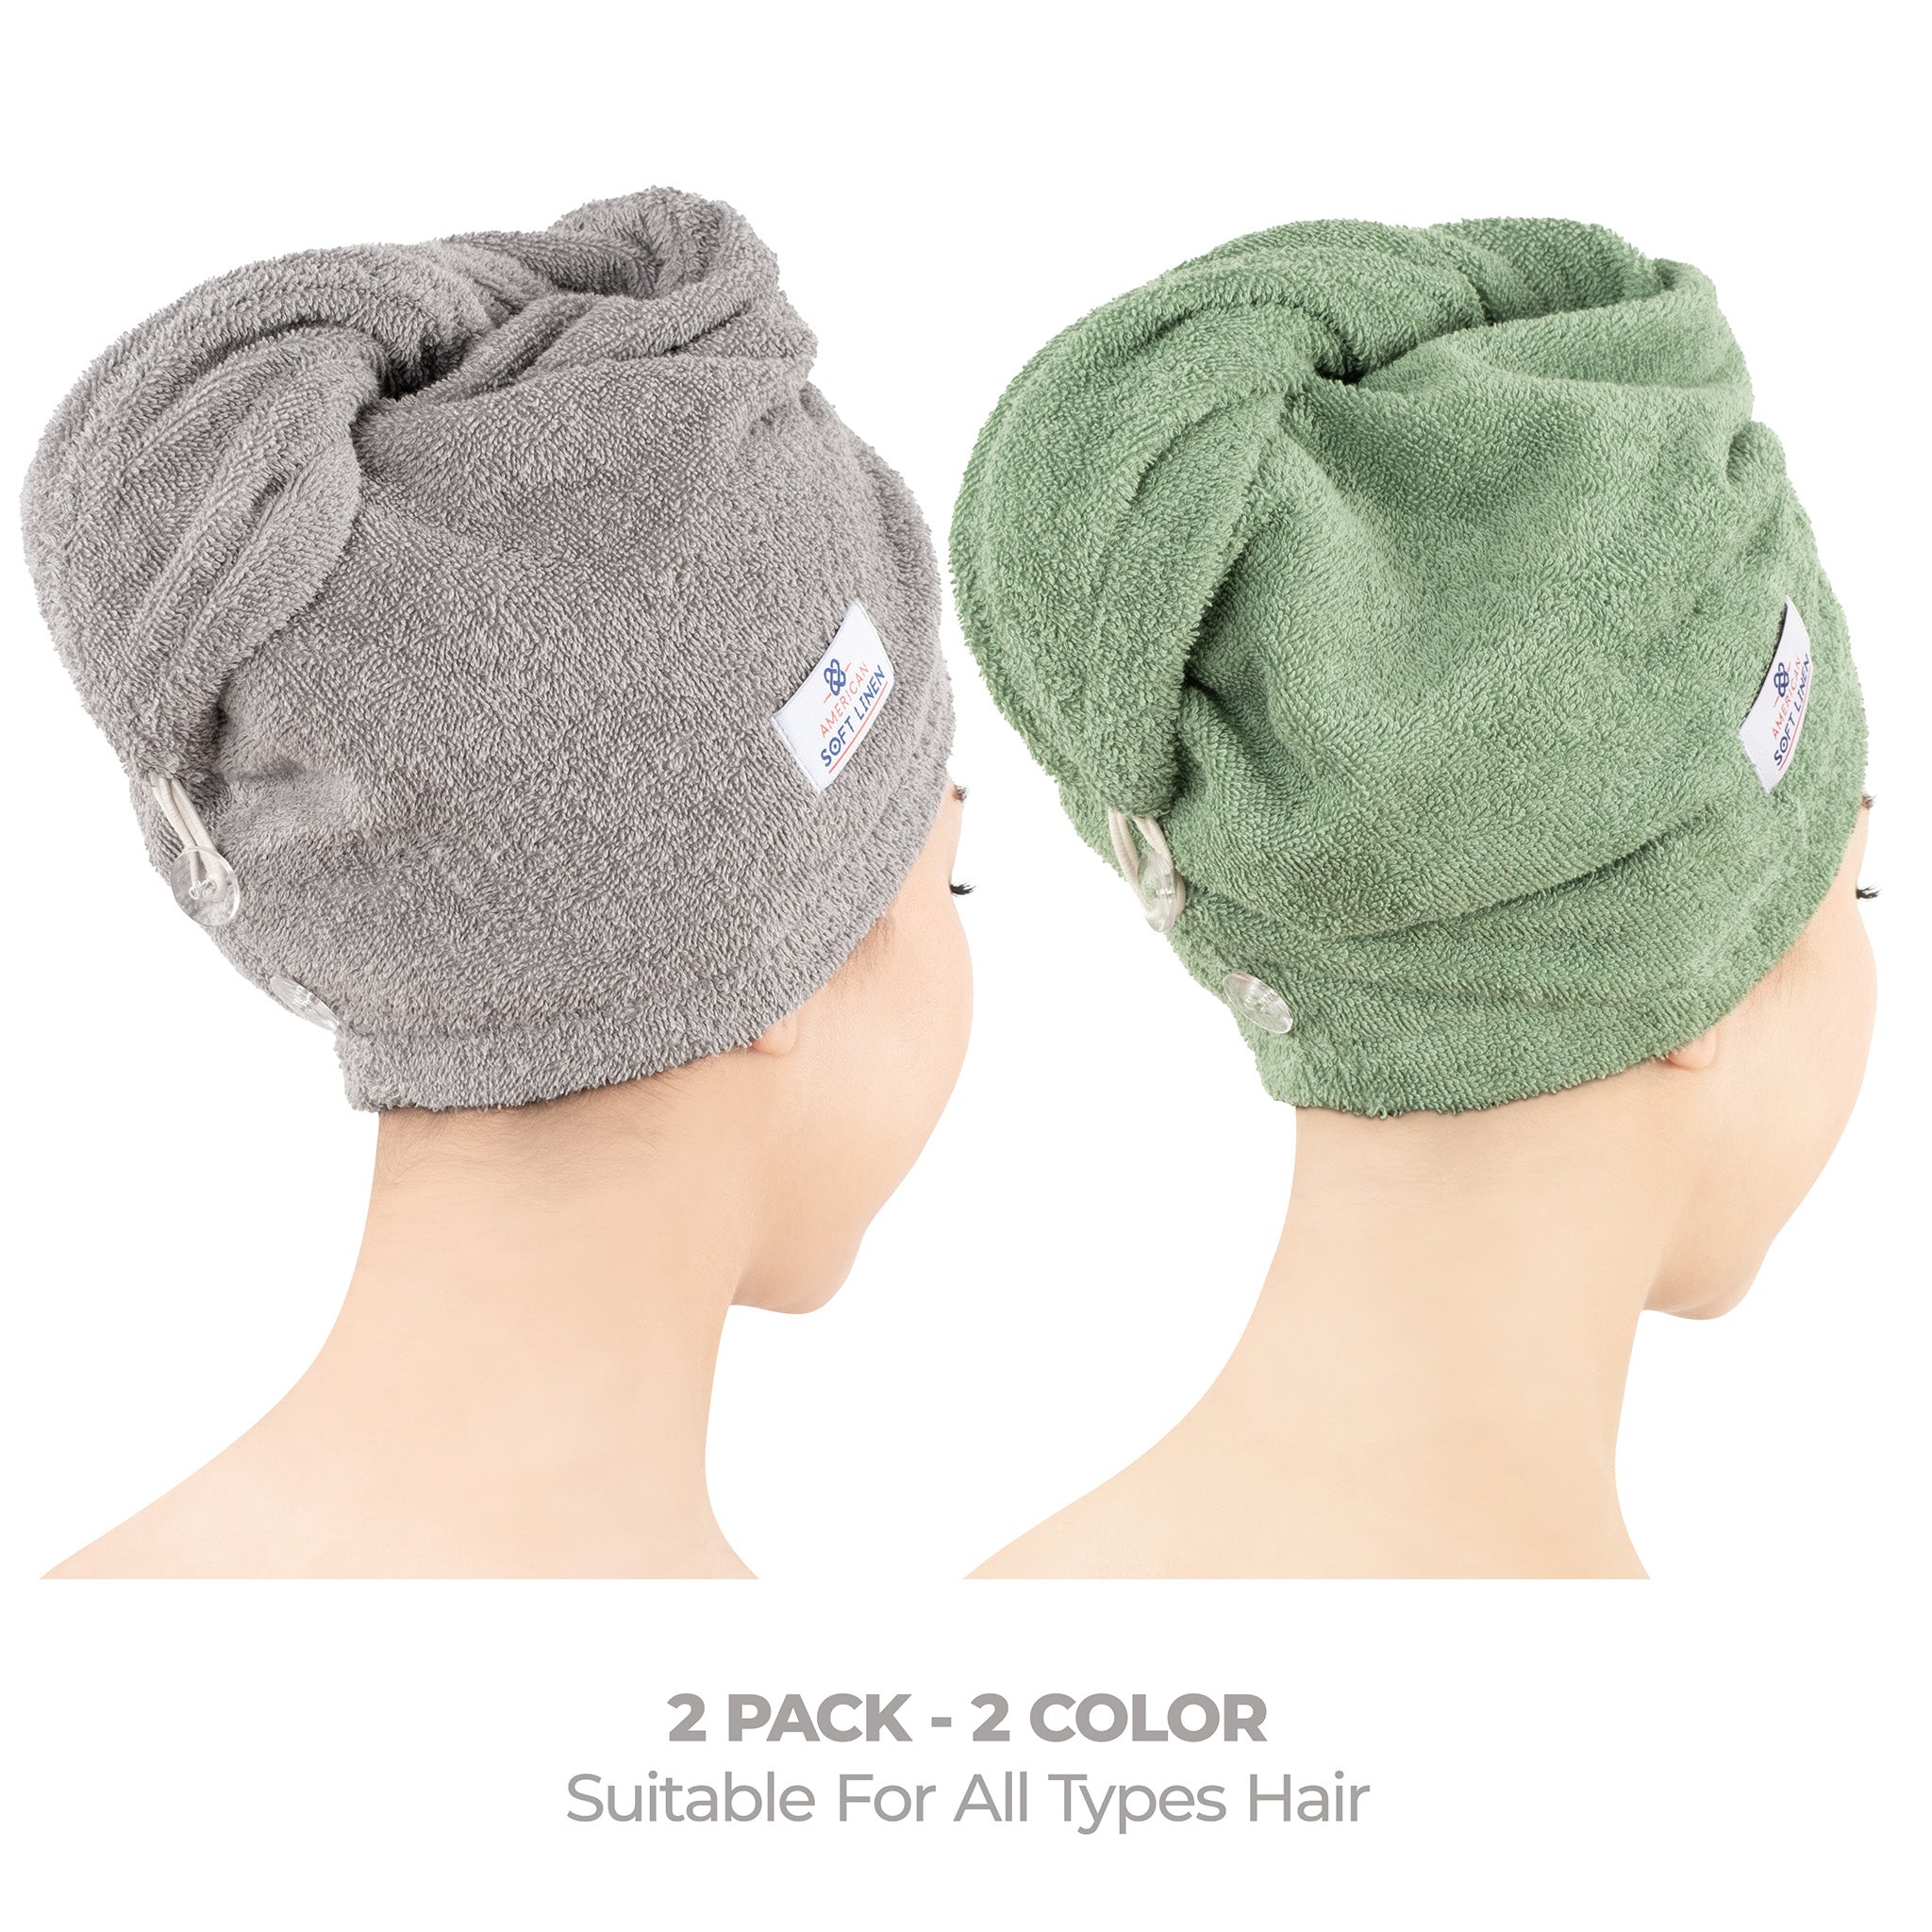 American Soft Linen 100% Cotton Hair Drying Towels for Women 2 pack 75 set case pack rockridge-sage green-2